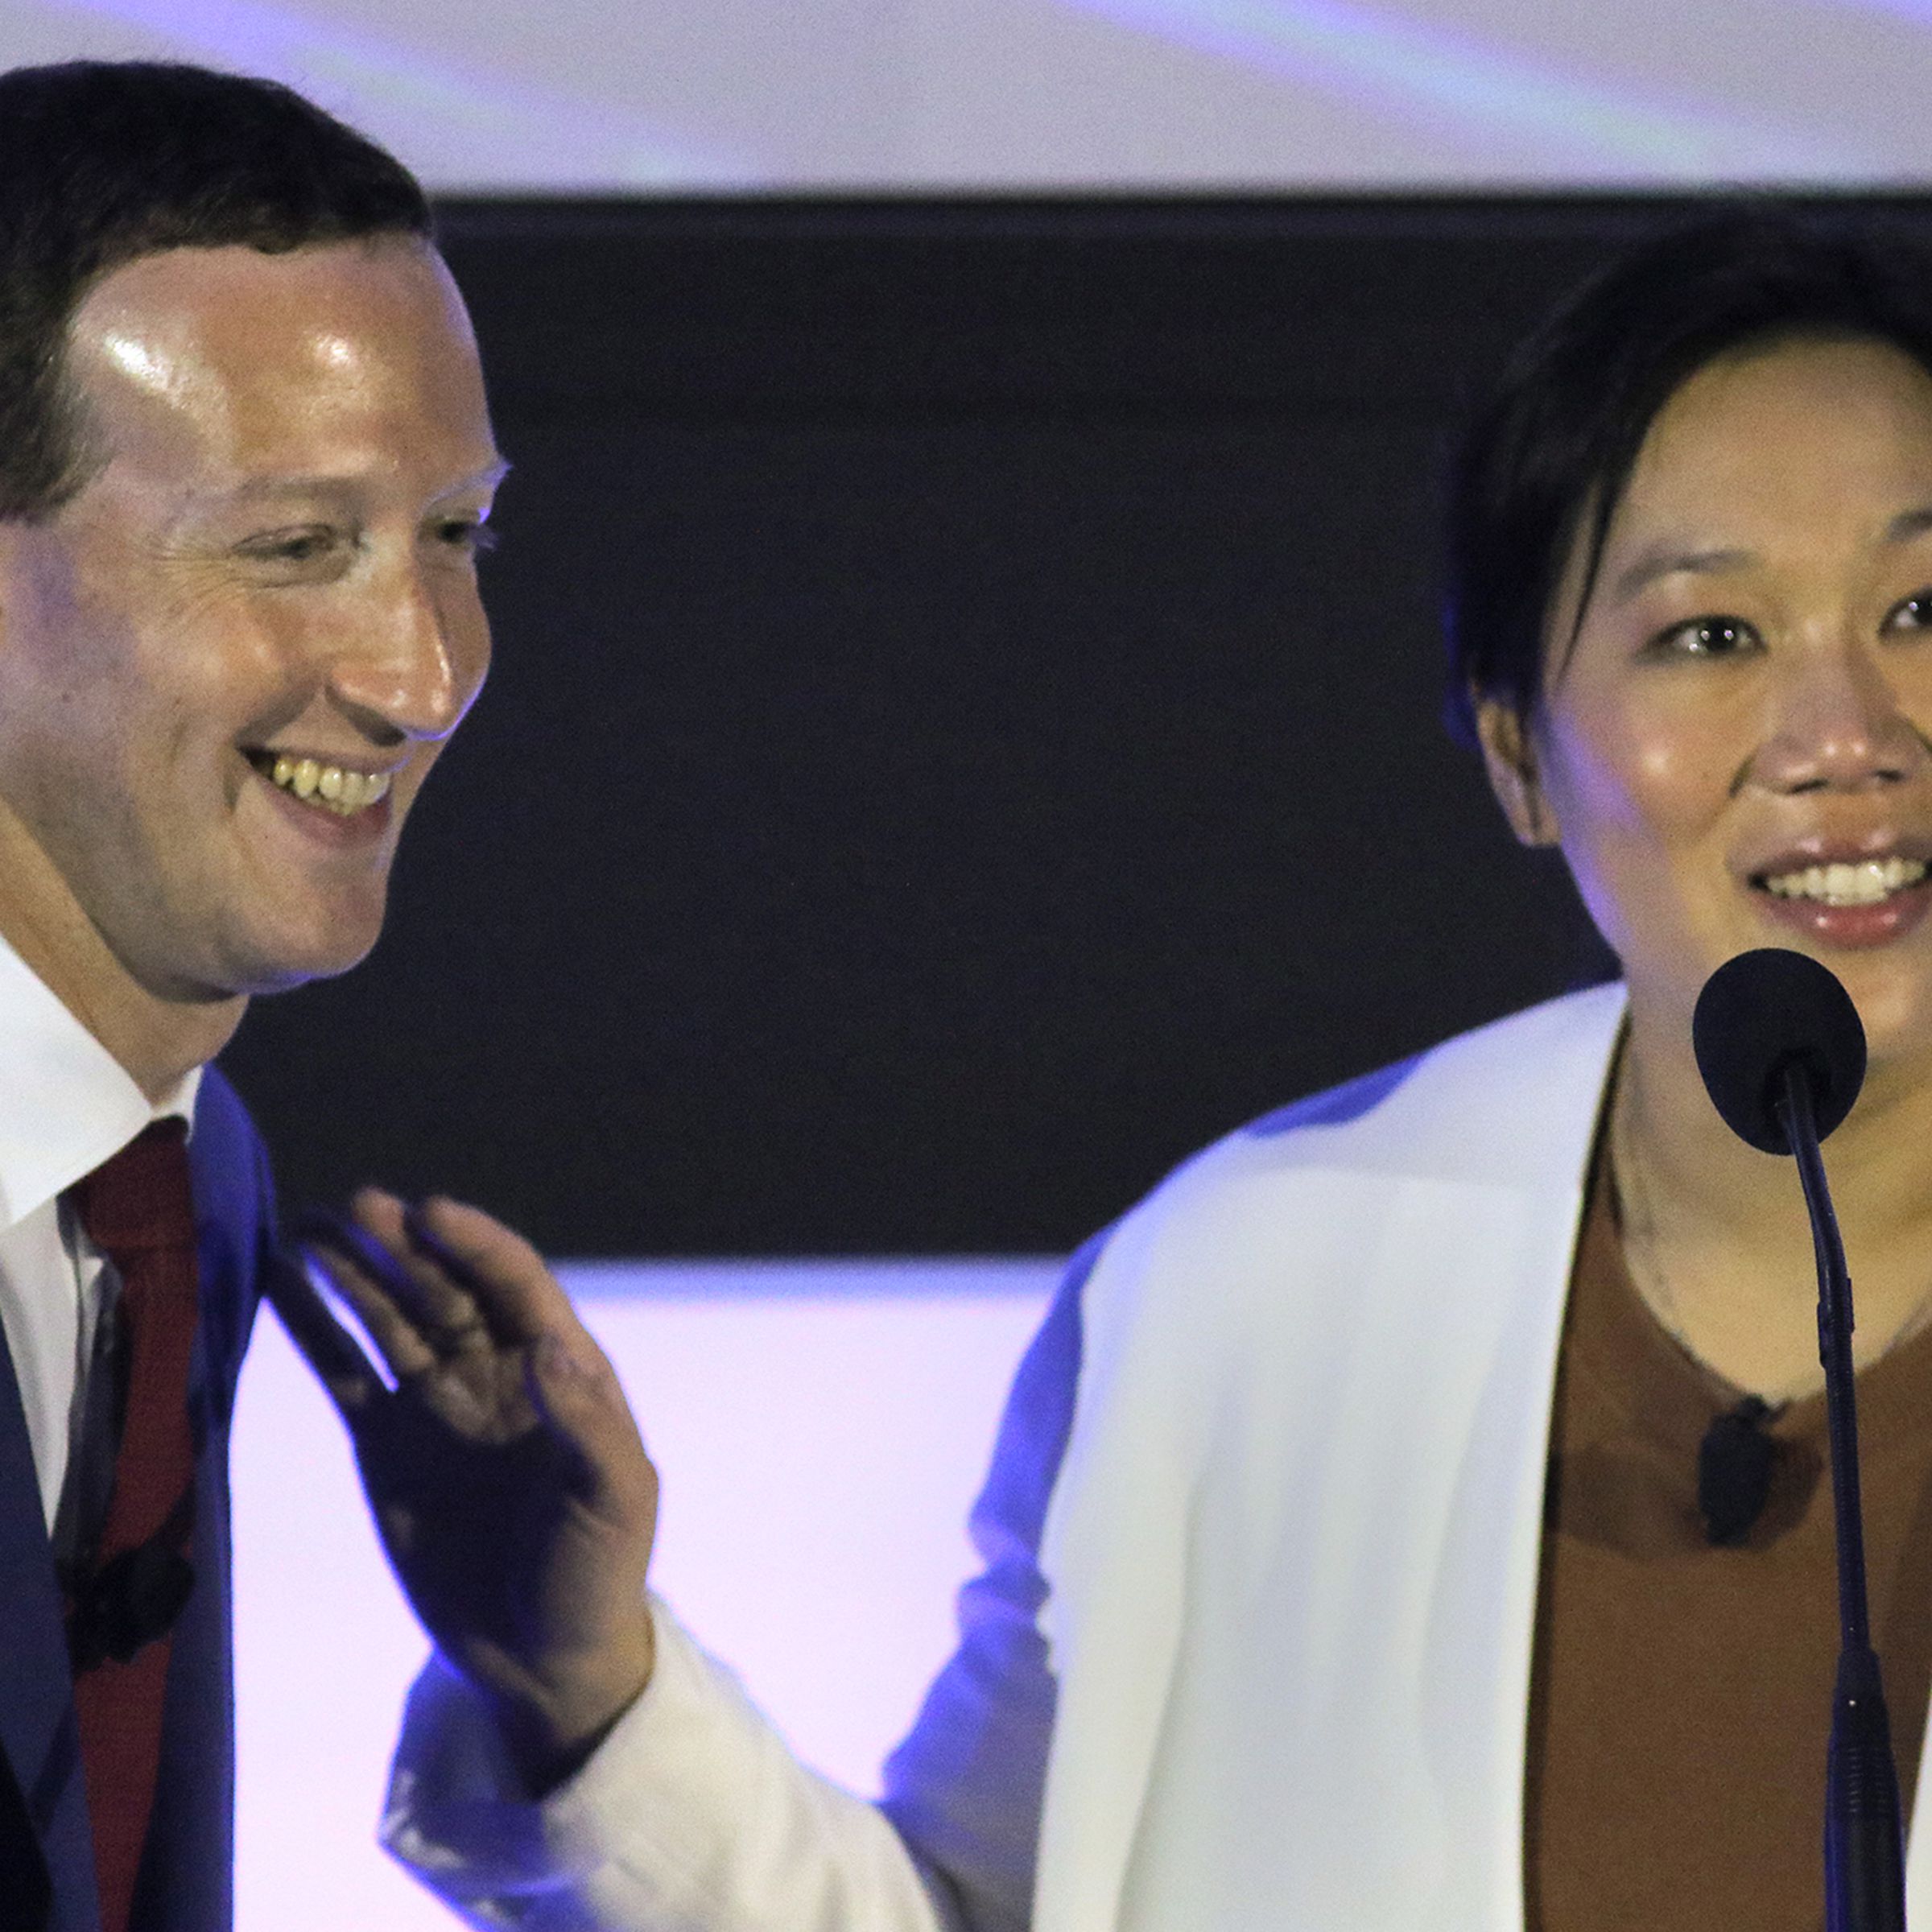 Mark Zuckerberg and Priscilla Chan stand next to each other smiling